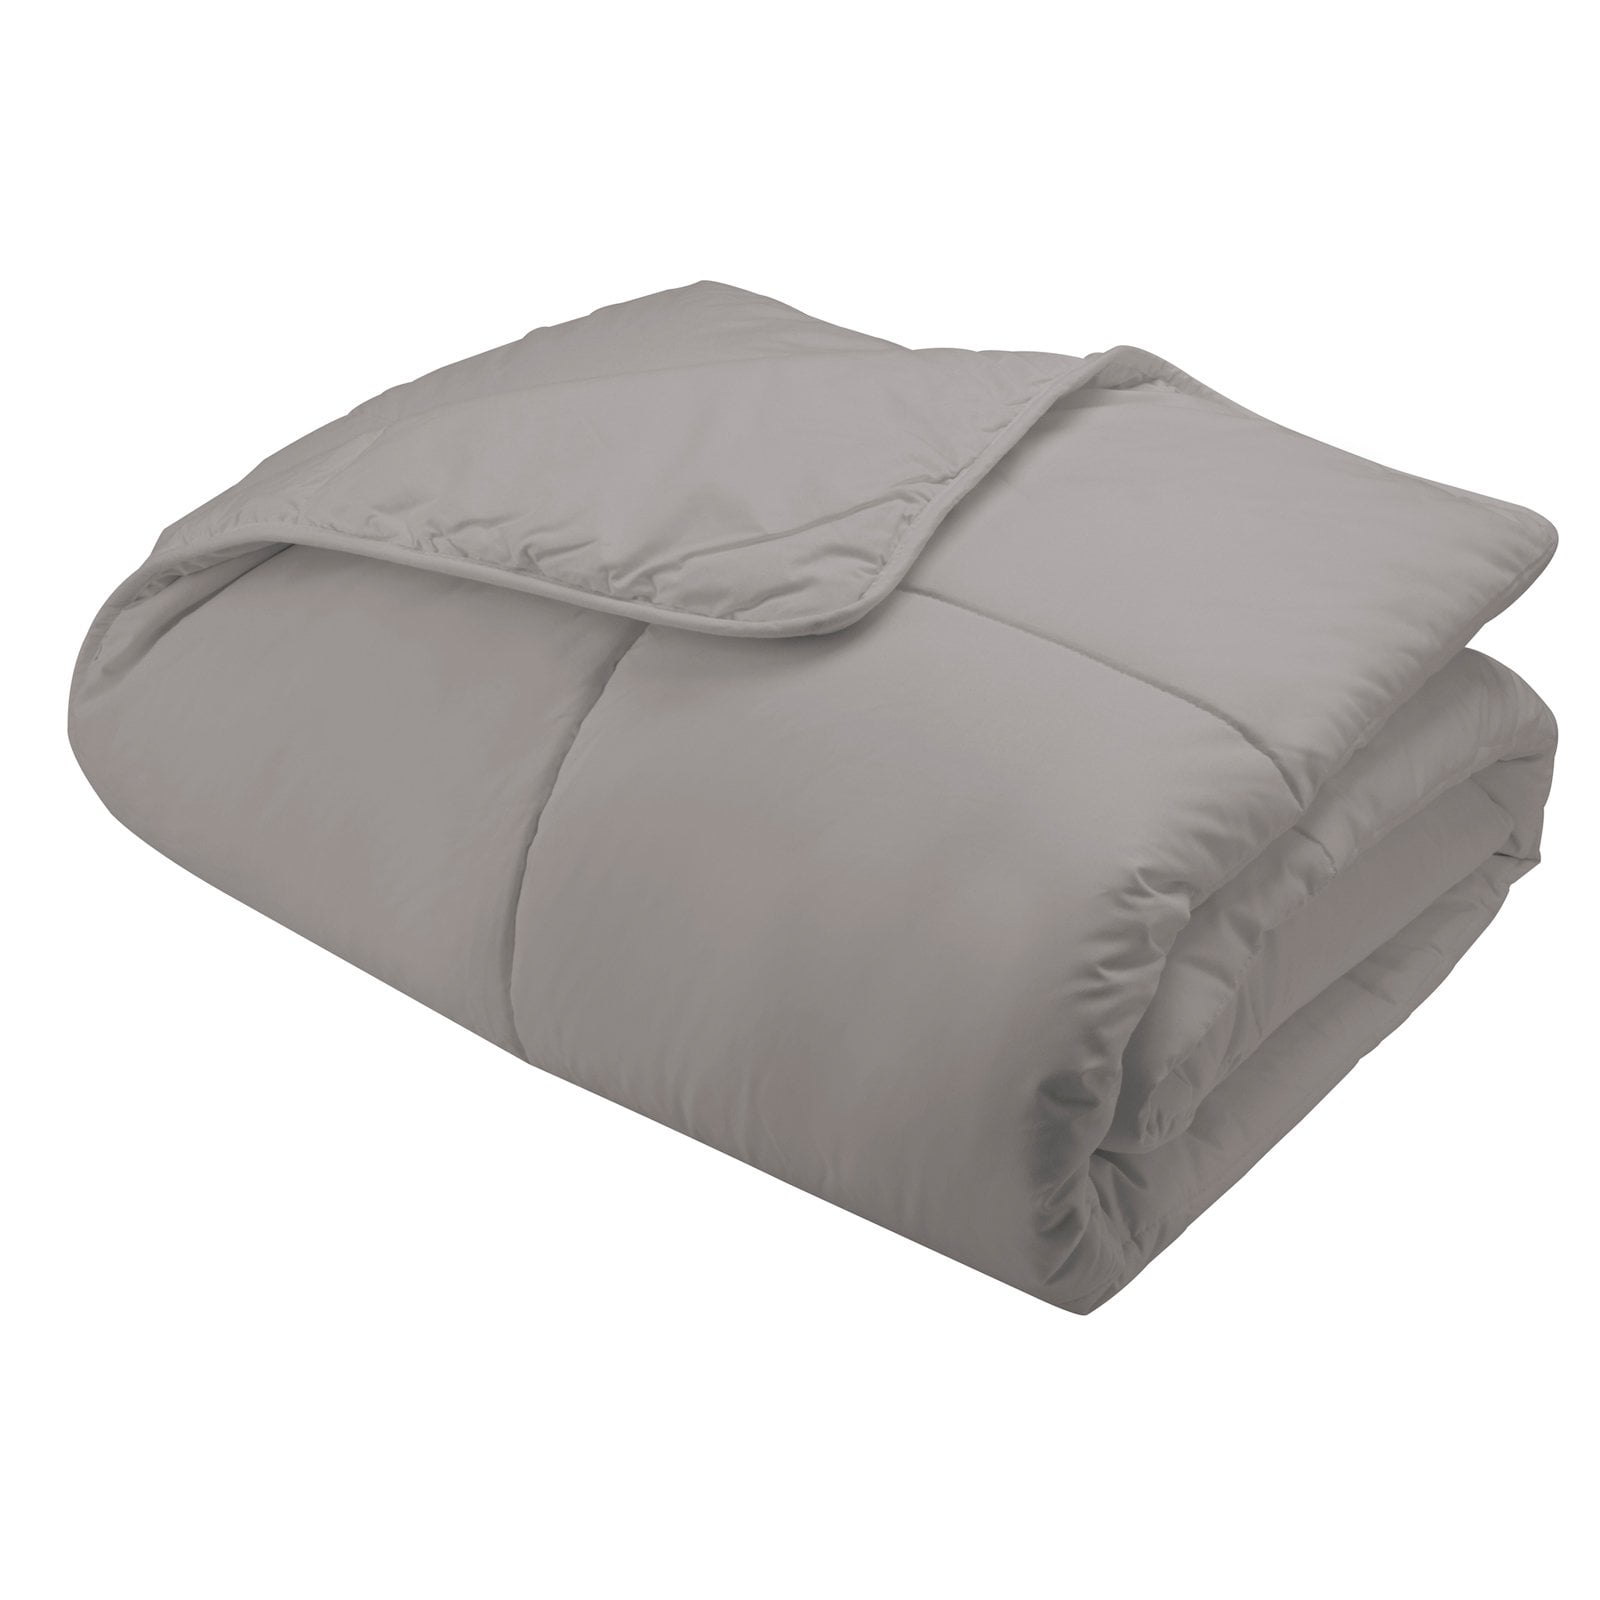 Twin Cottonpure Sustainable 500 Thread Count Cotton Cover All Natural Breathable Hypoallergenic Cotton Comforter 